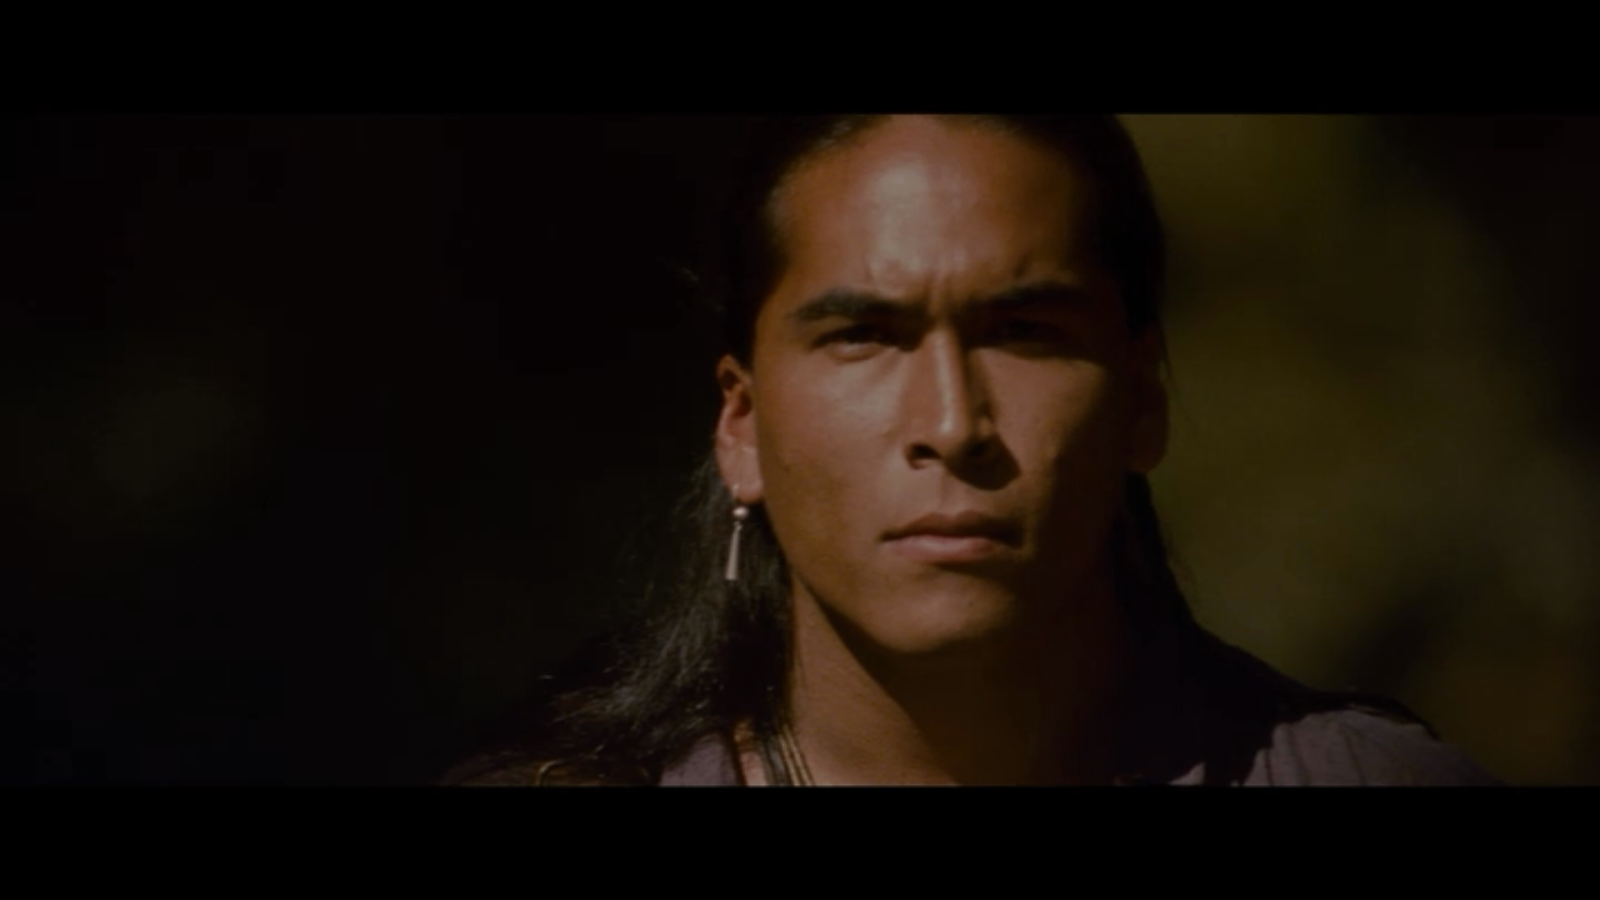 The Last of the Mohicans (1992) - AoM: Movies et al. 